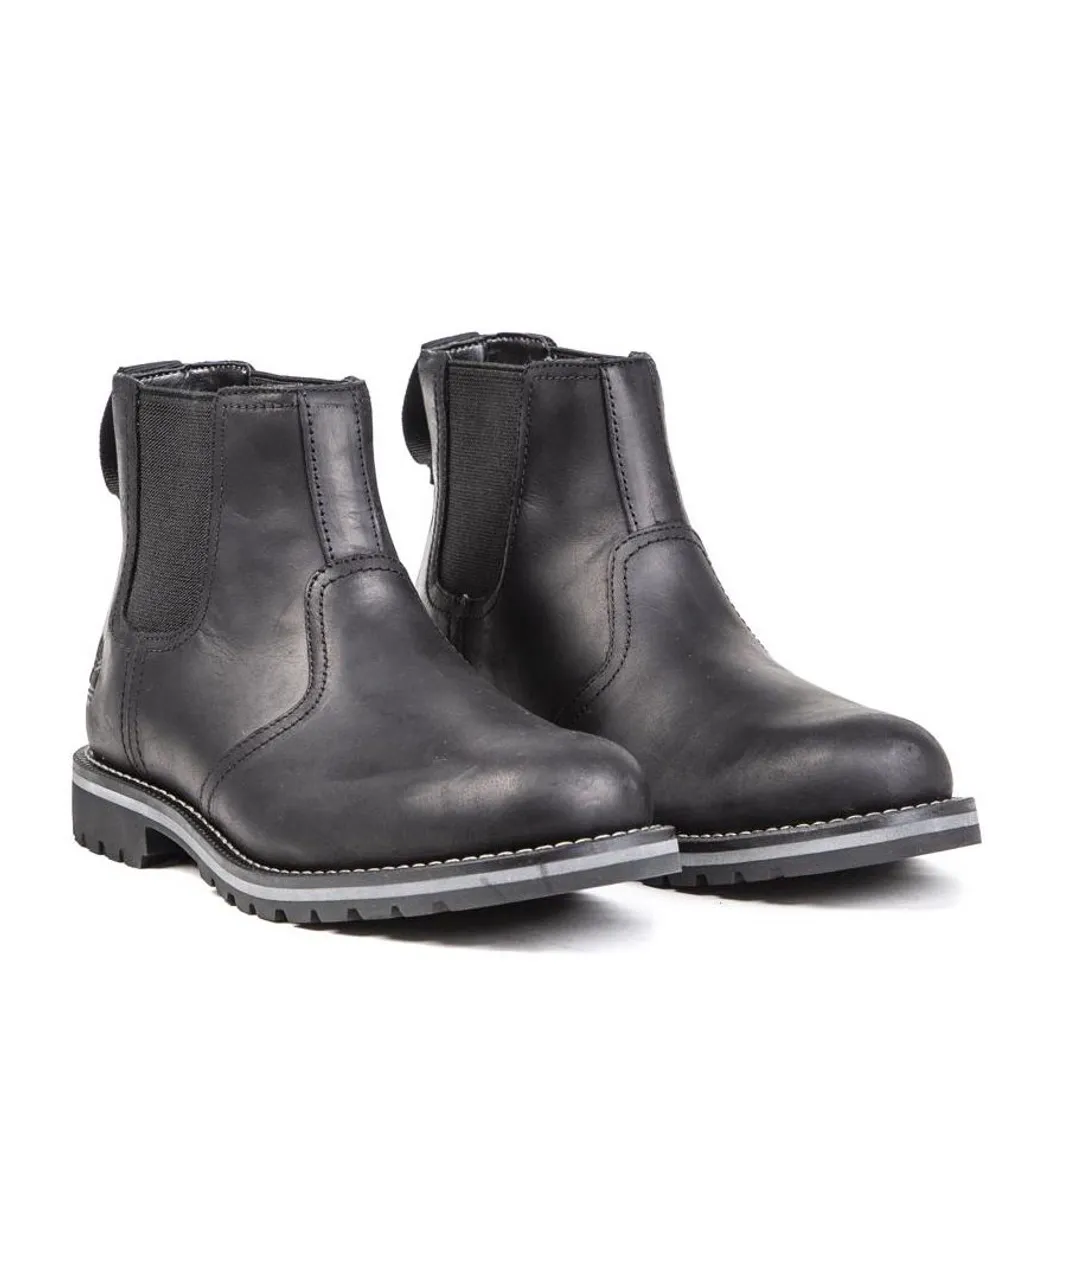 Timberland Mens Larchmont Chelsea Boots - Black